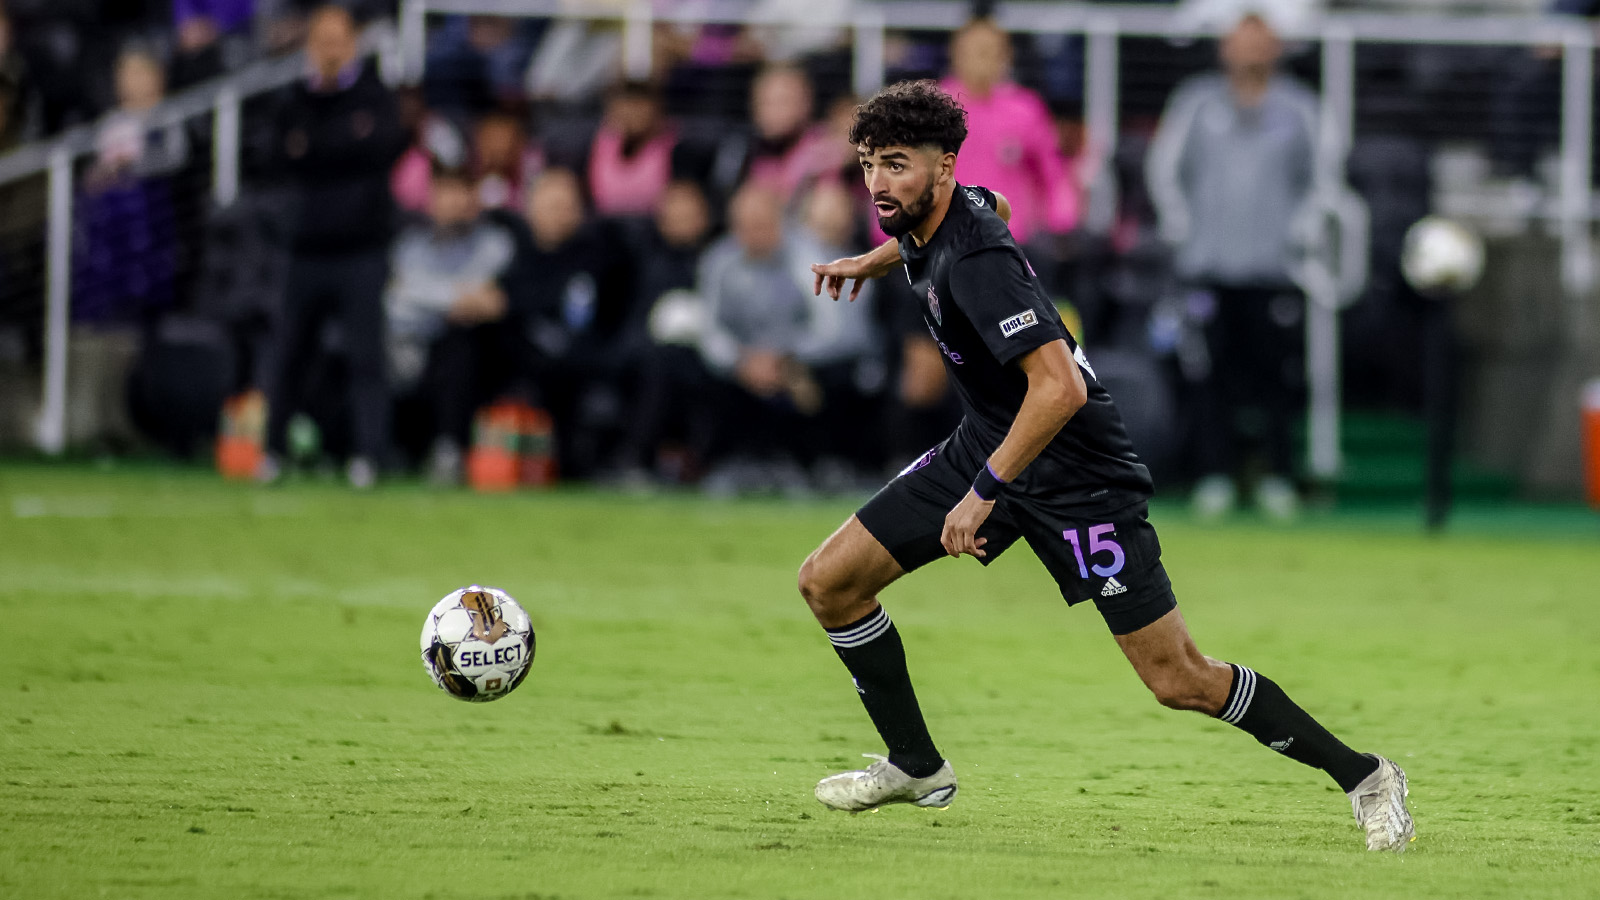 LouCity FC falls to Tampa Bay Rowdies in Eastern Conference Finals